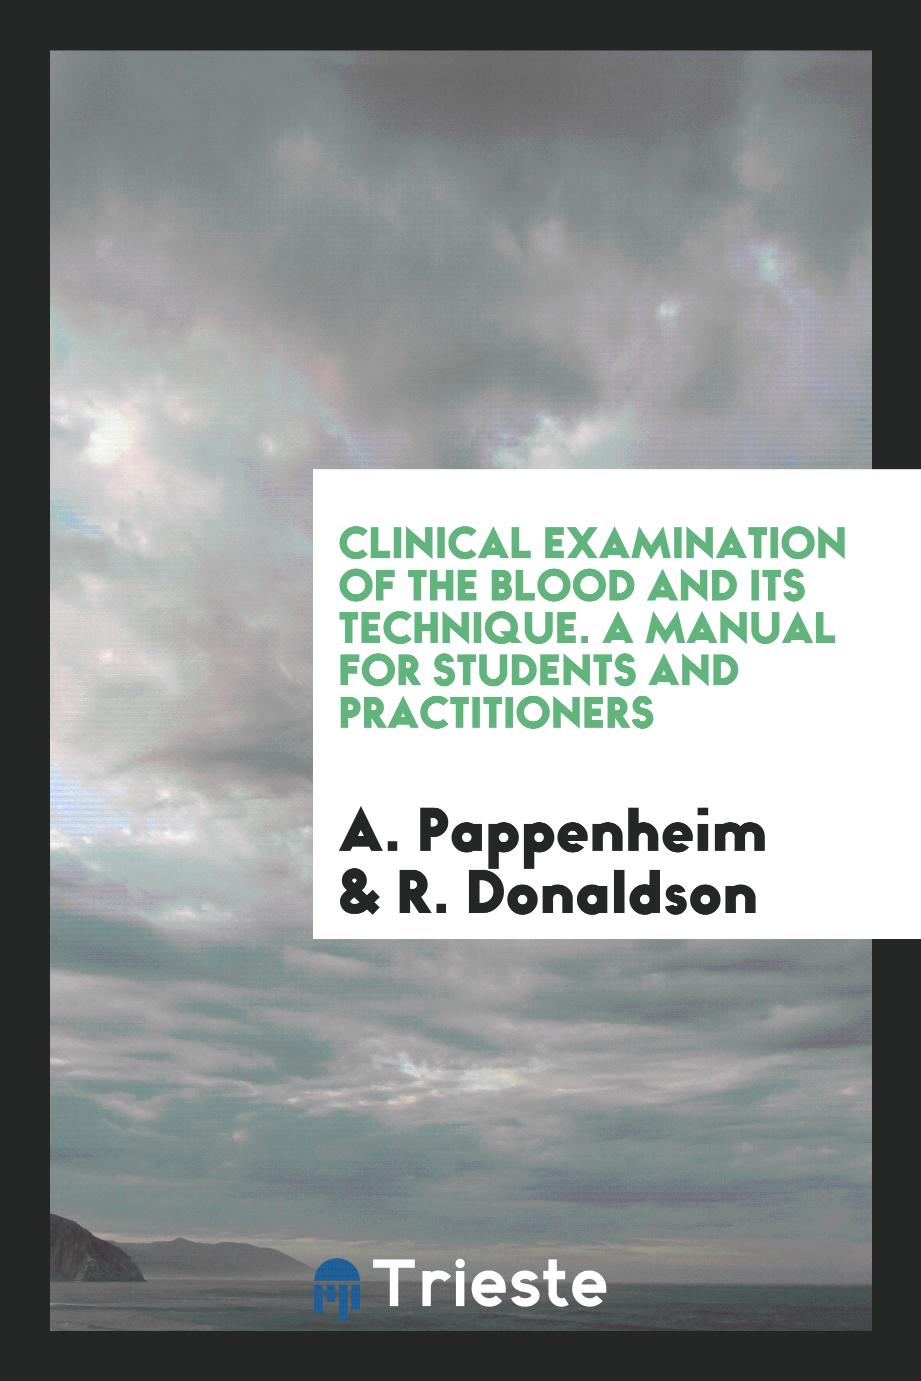 Clinical Examination of the Blood and Its Technique. A Manual for Students and Practitioners